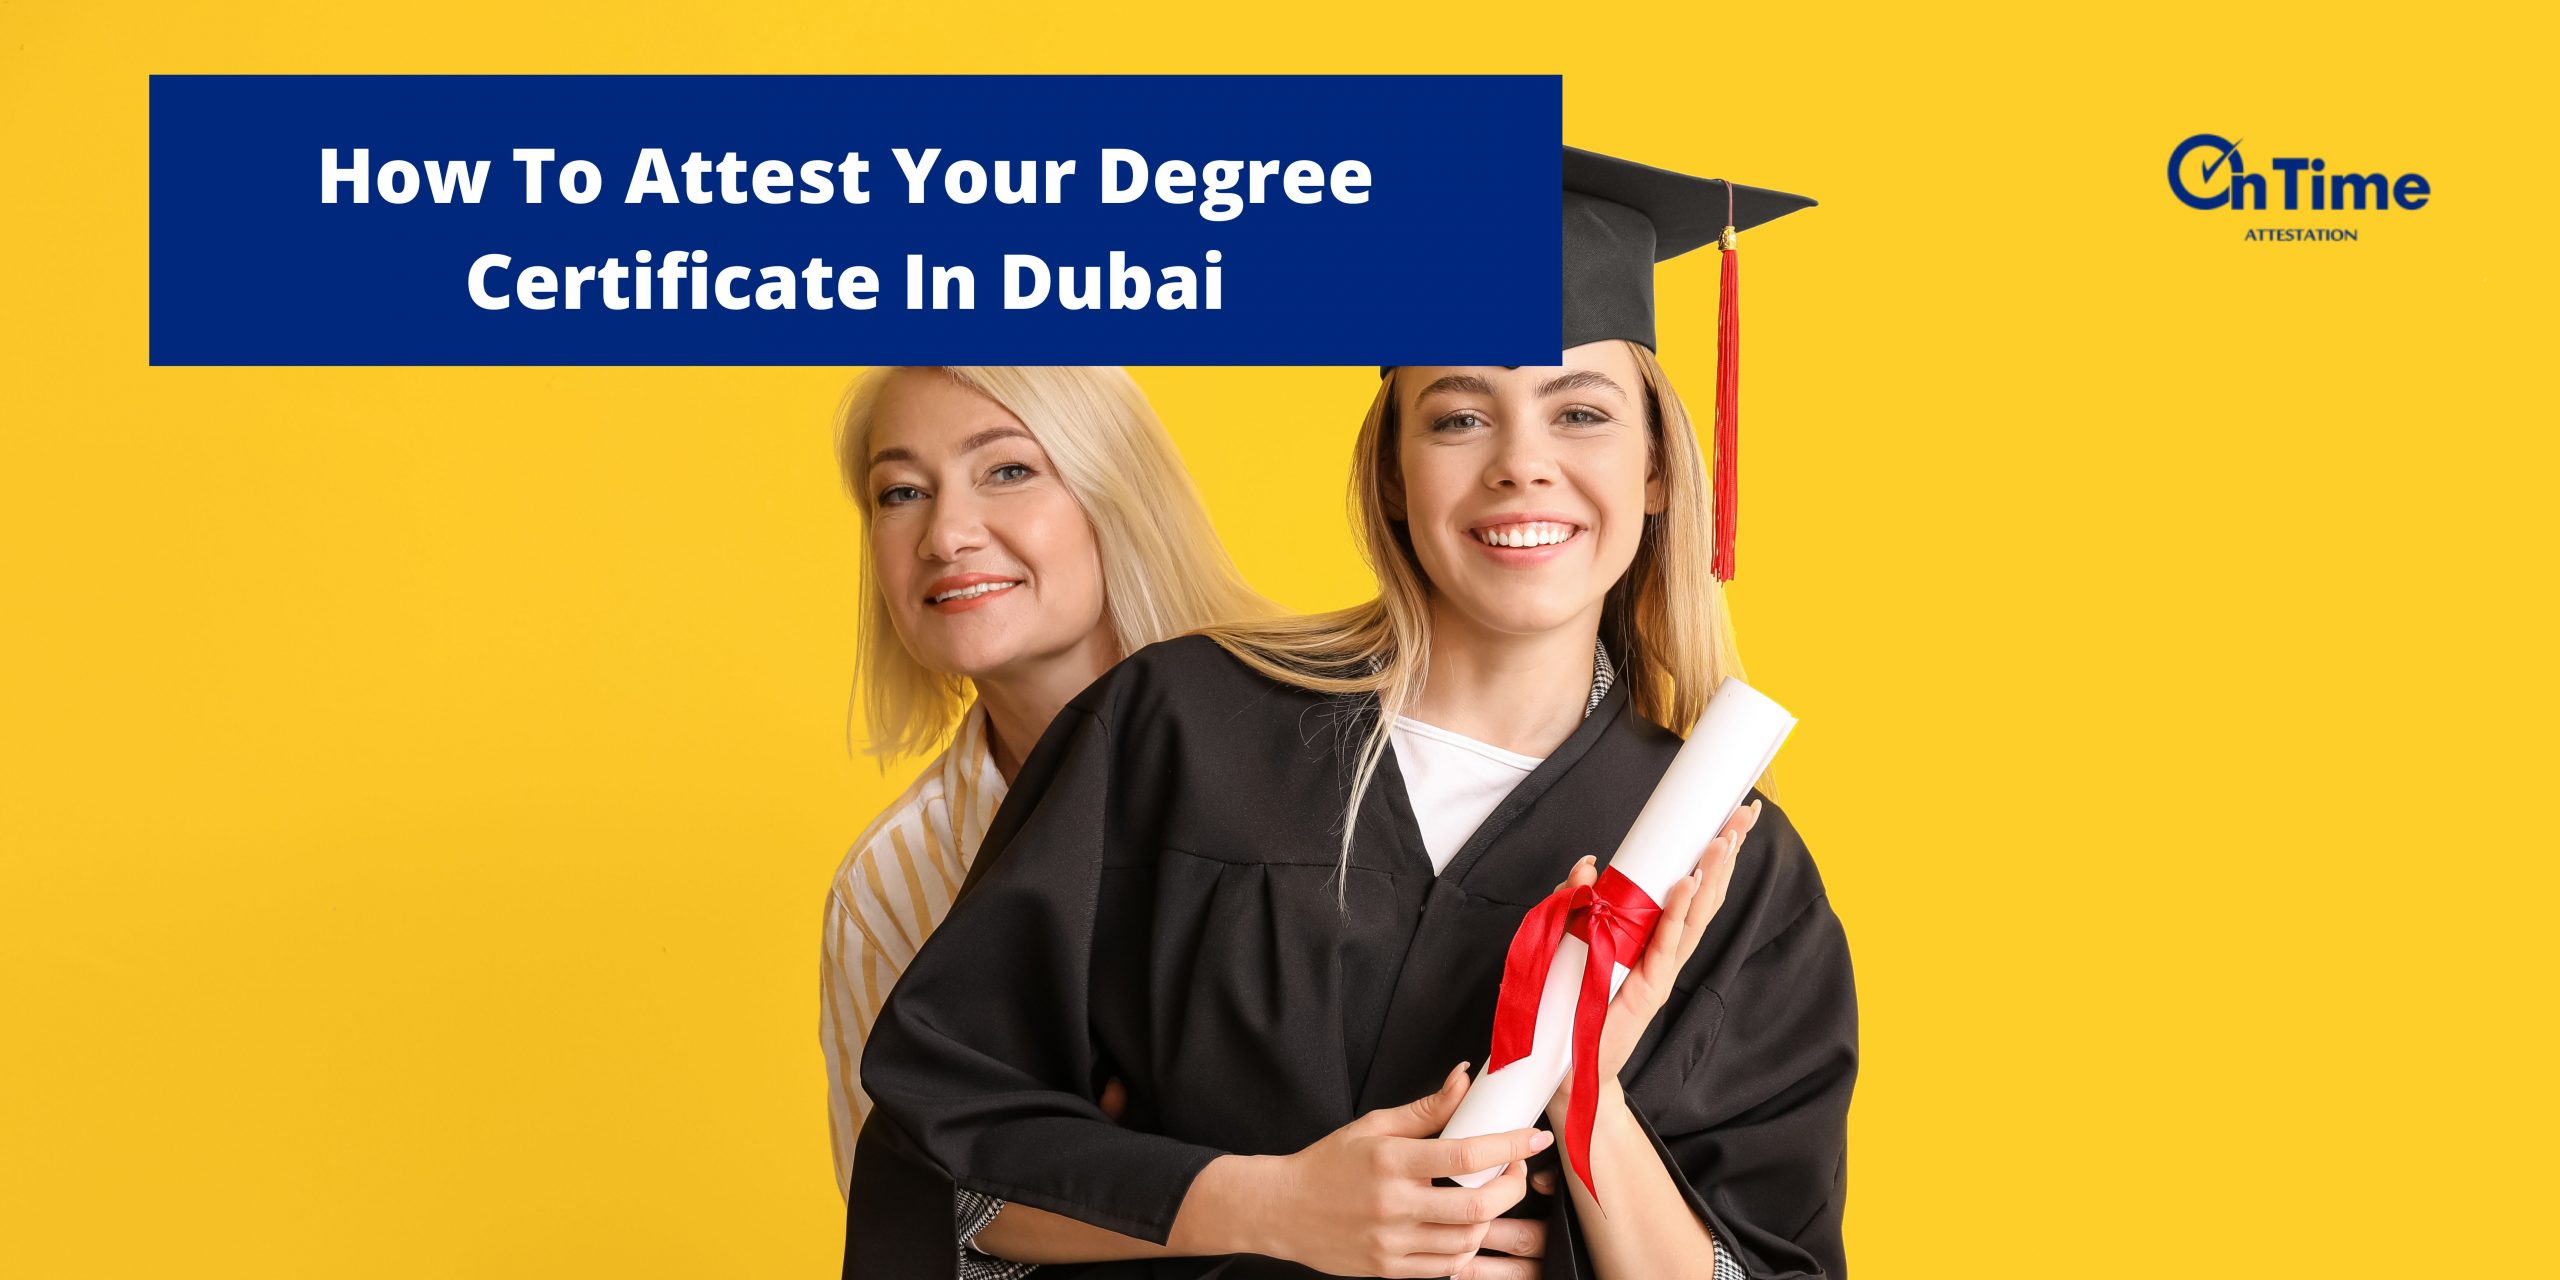 How To Attest Your Degree Certificate In Dubai